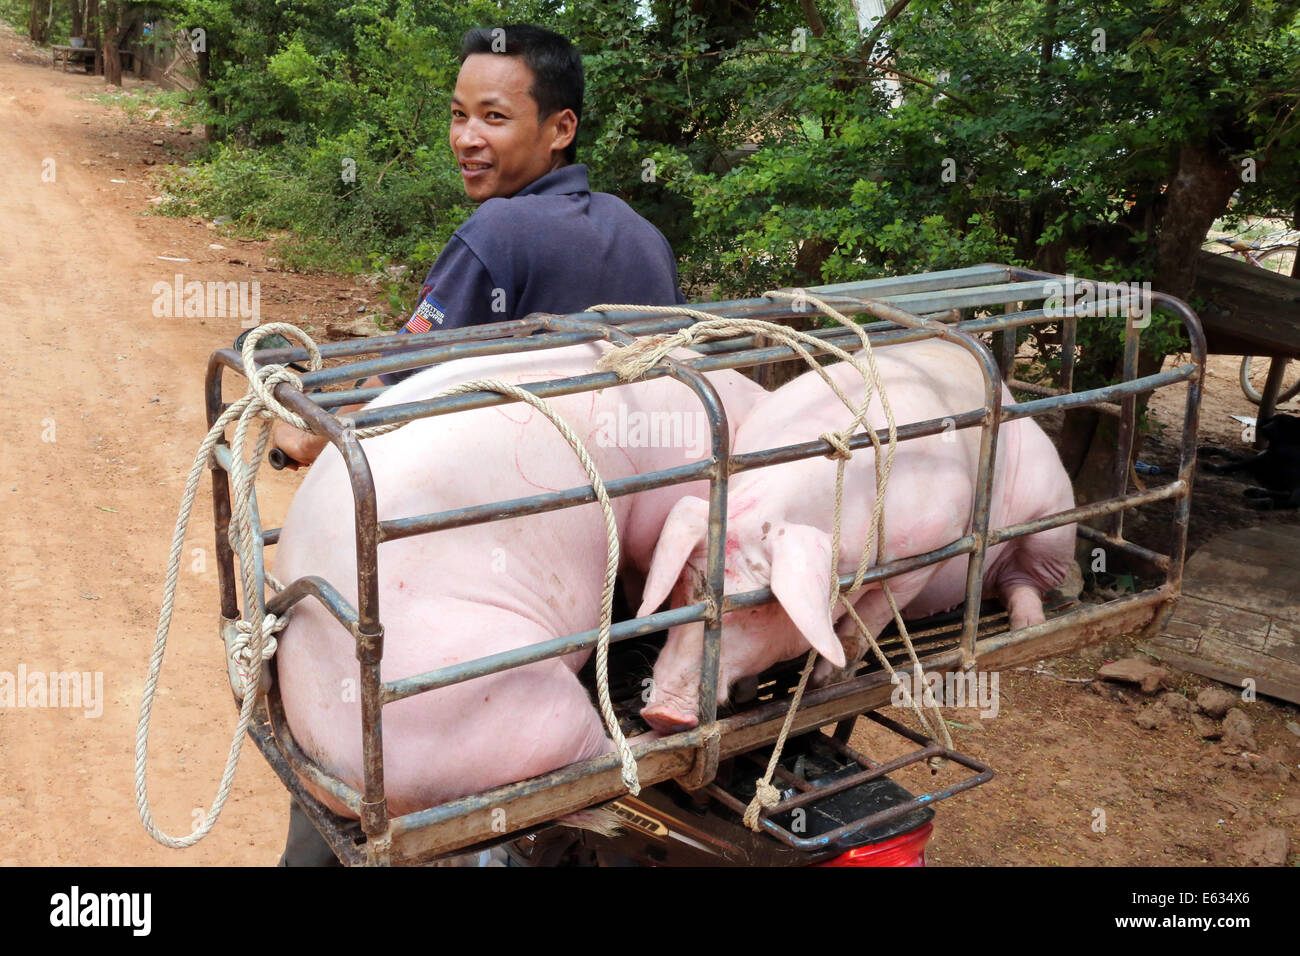 Farmer transporting two live pigs in a cage on his motorcycle, Cambodia Stock Photo